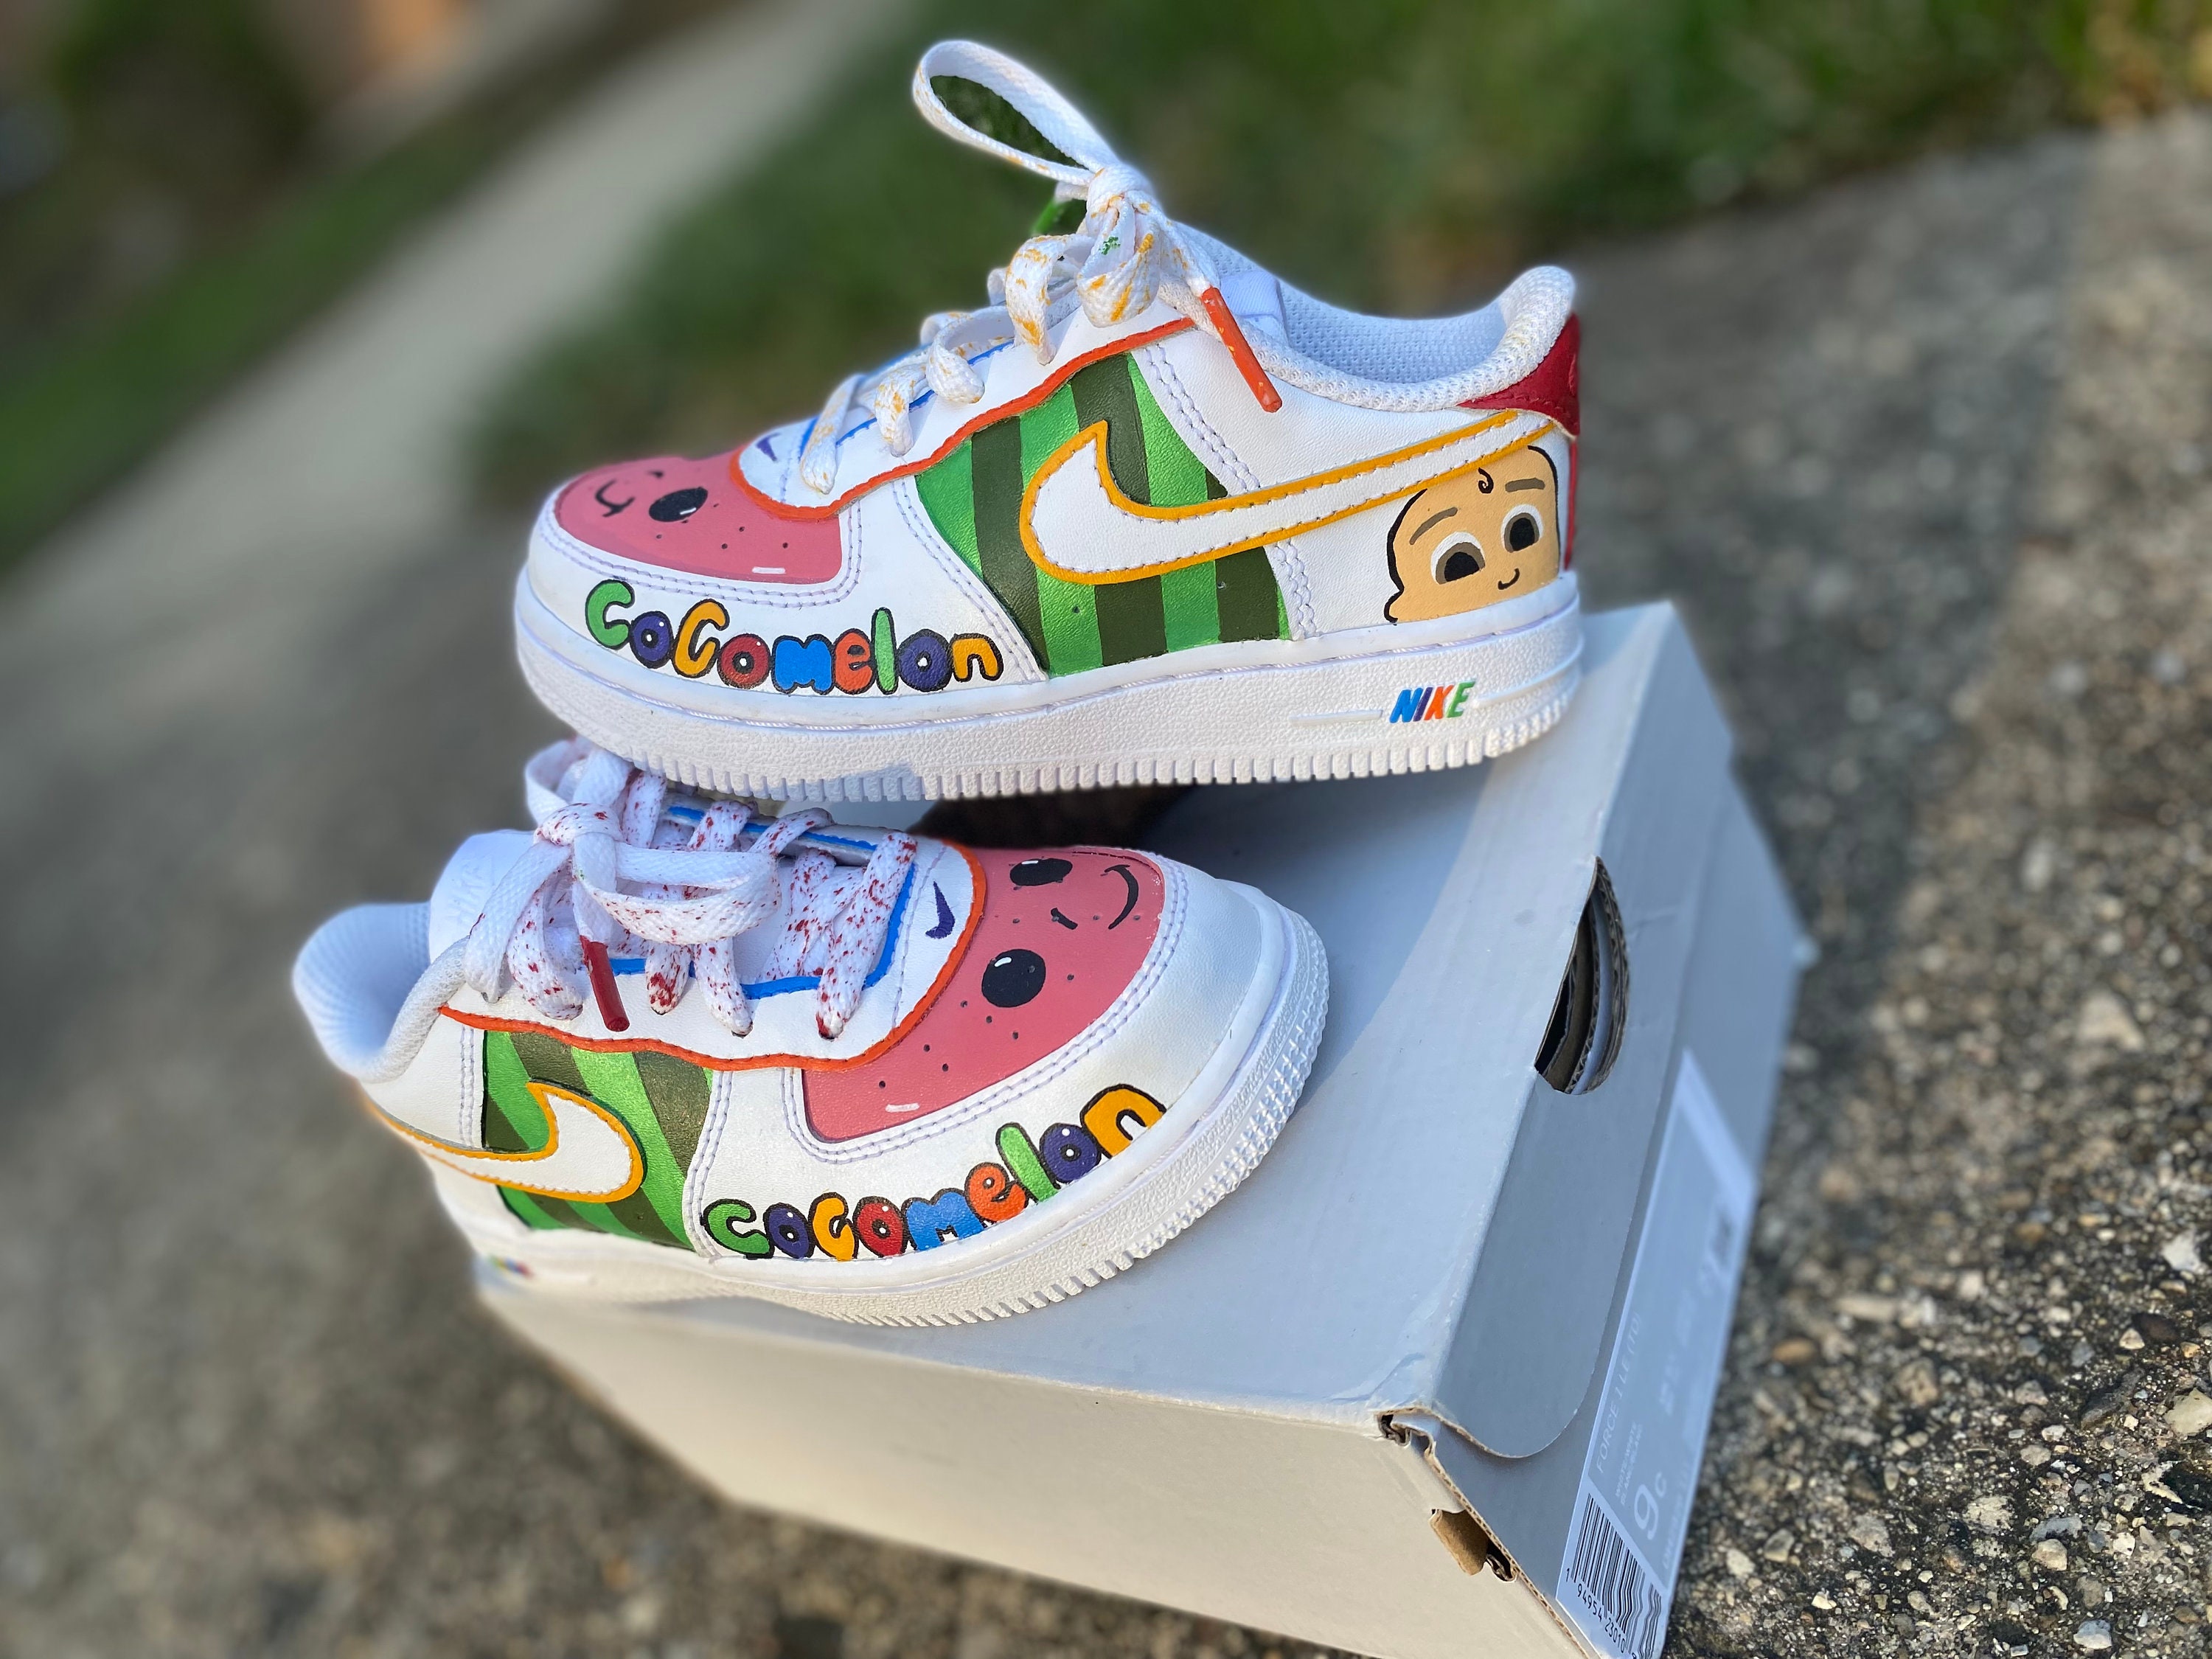 Chicago Bears NFL Snoopy Personalized Air Force 1 Low Top Shoes - Growkoc